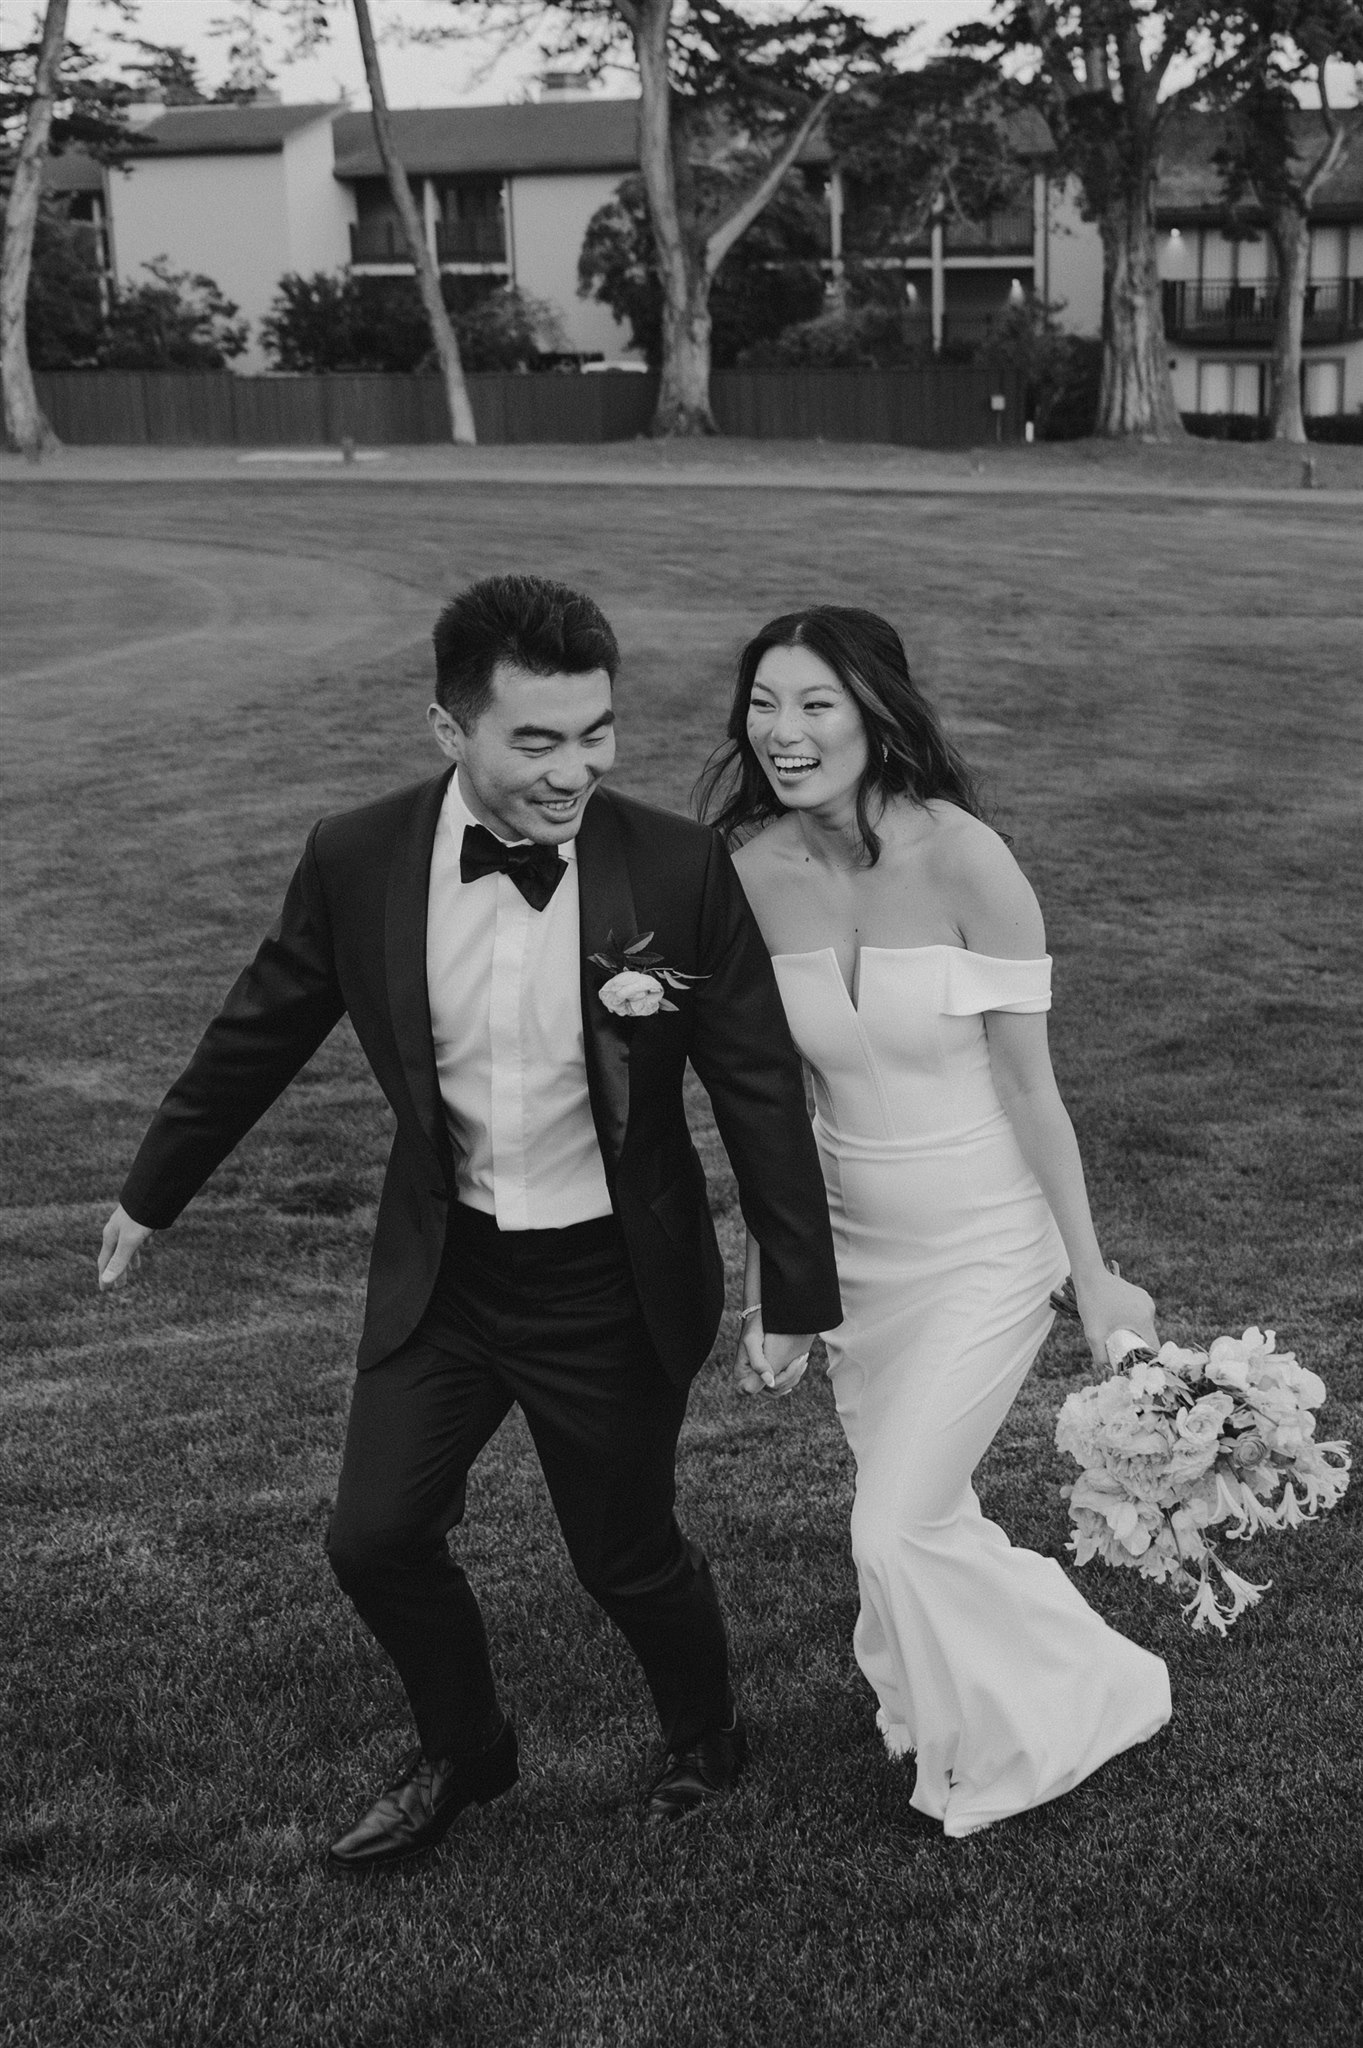 bride and groom portraits smiling candid black and white wedding shots bride and groom running away field happy candid joy